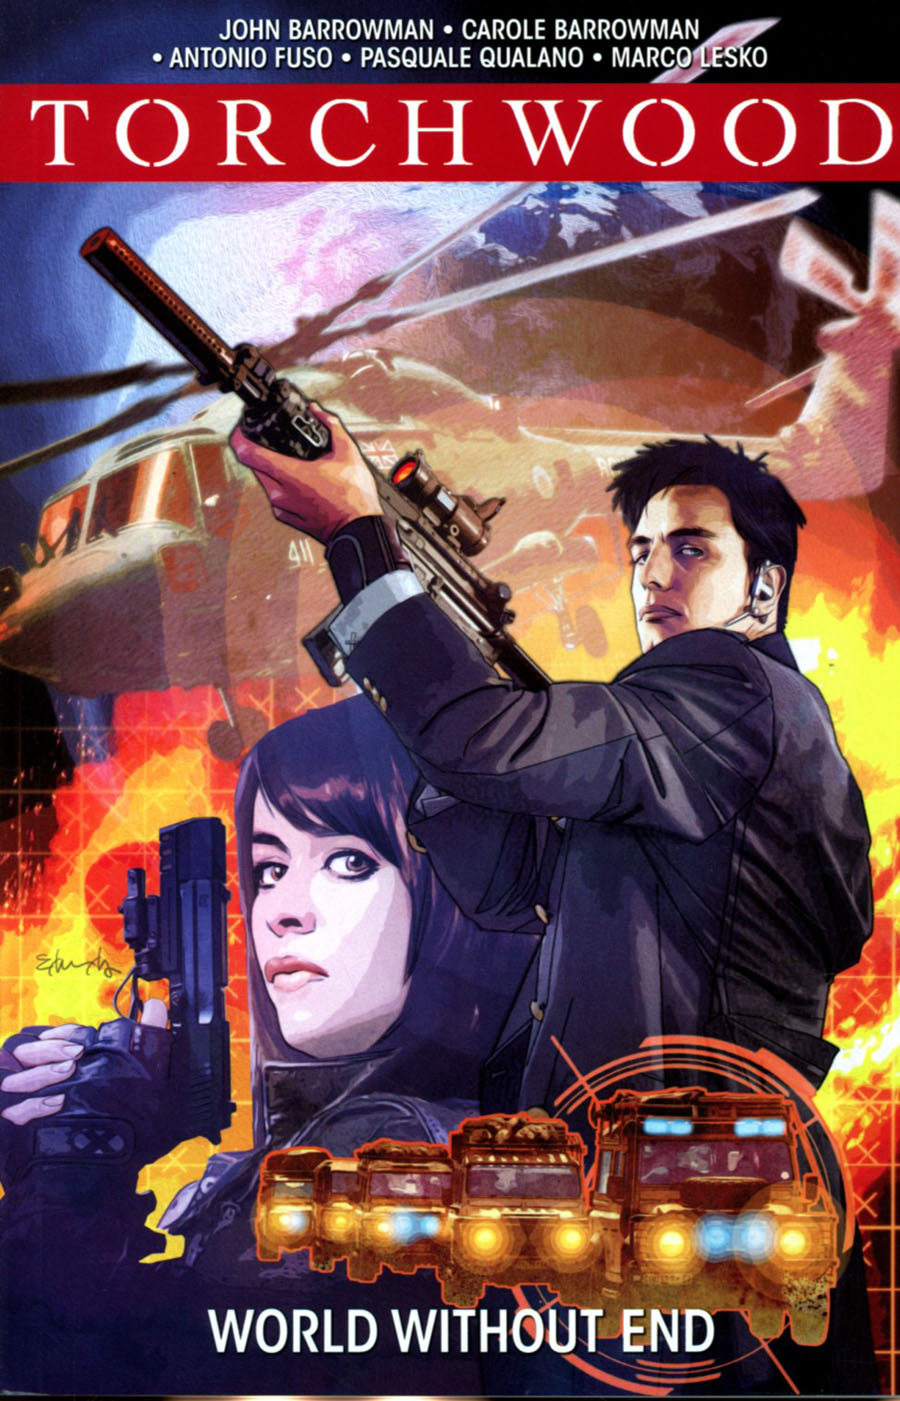 Torchwood Vol 1 World Without End TP